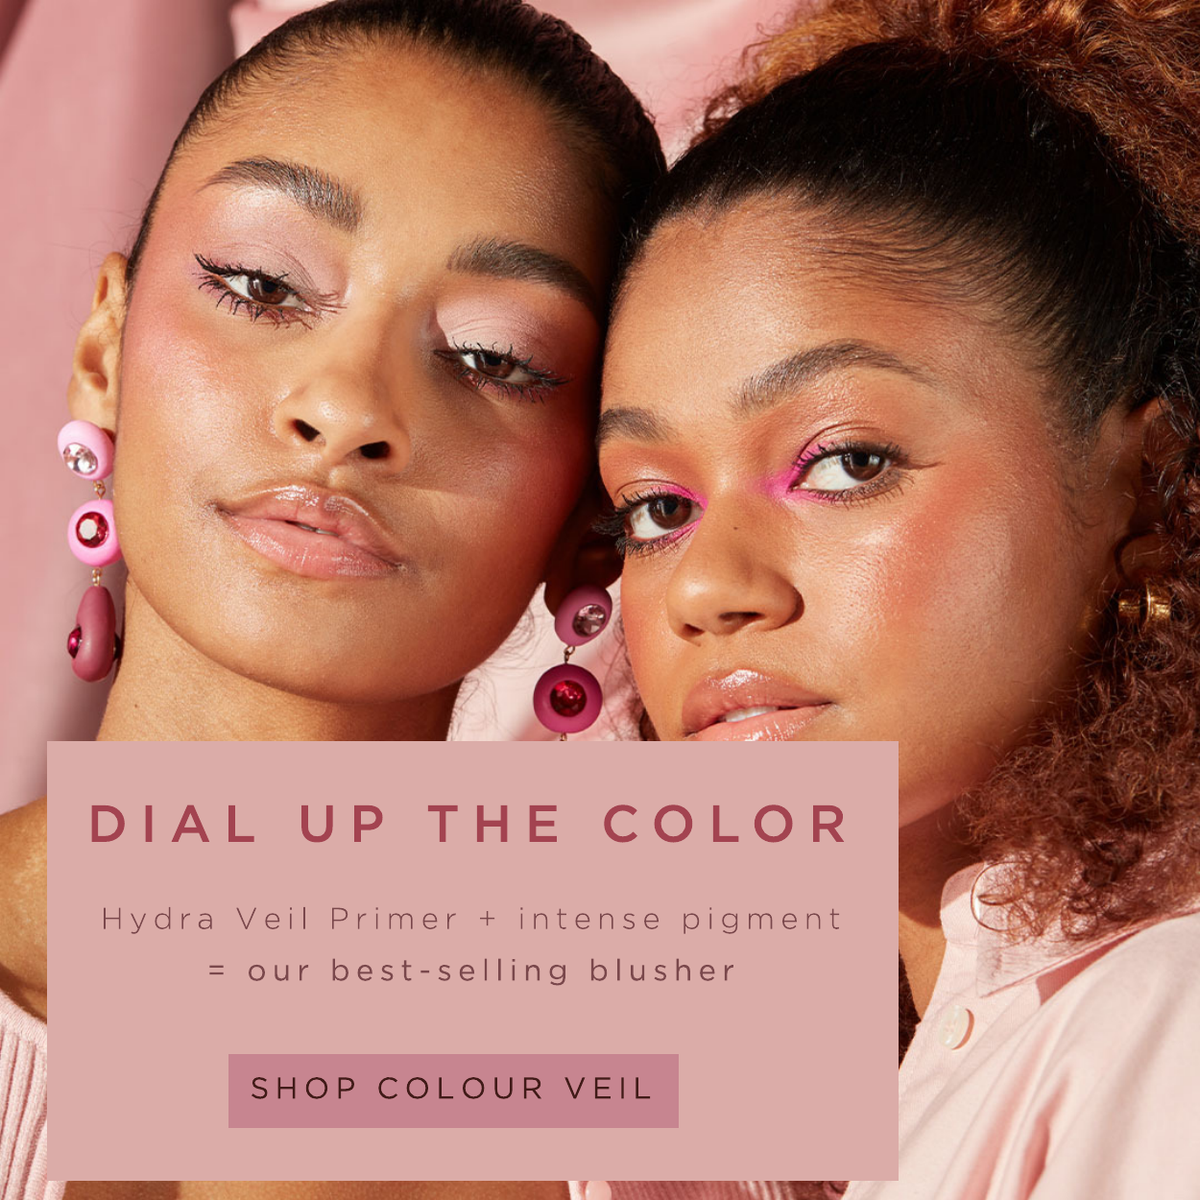 Colour Veil models on a pink background.